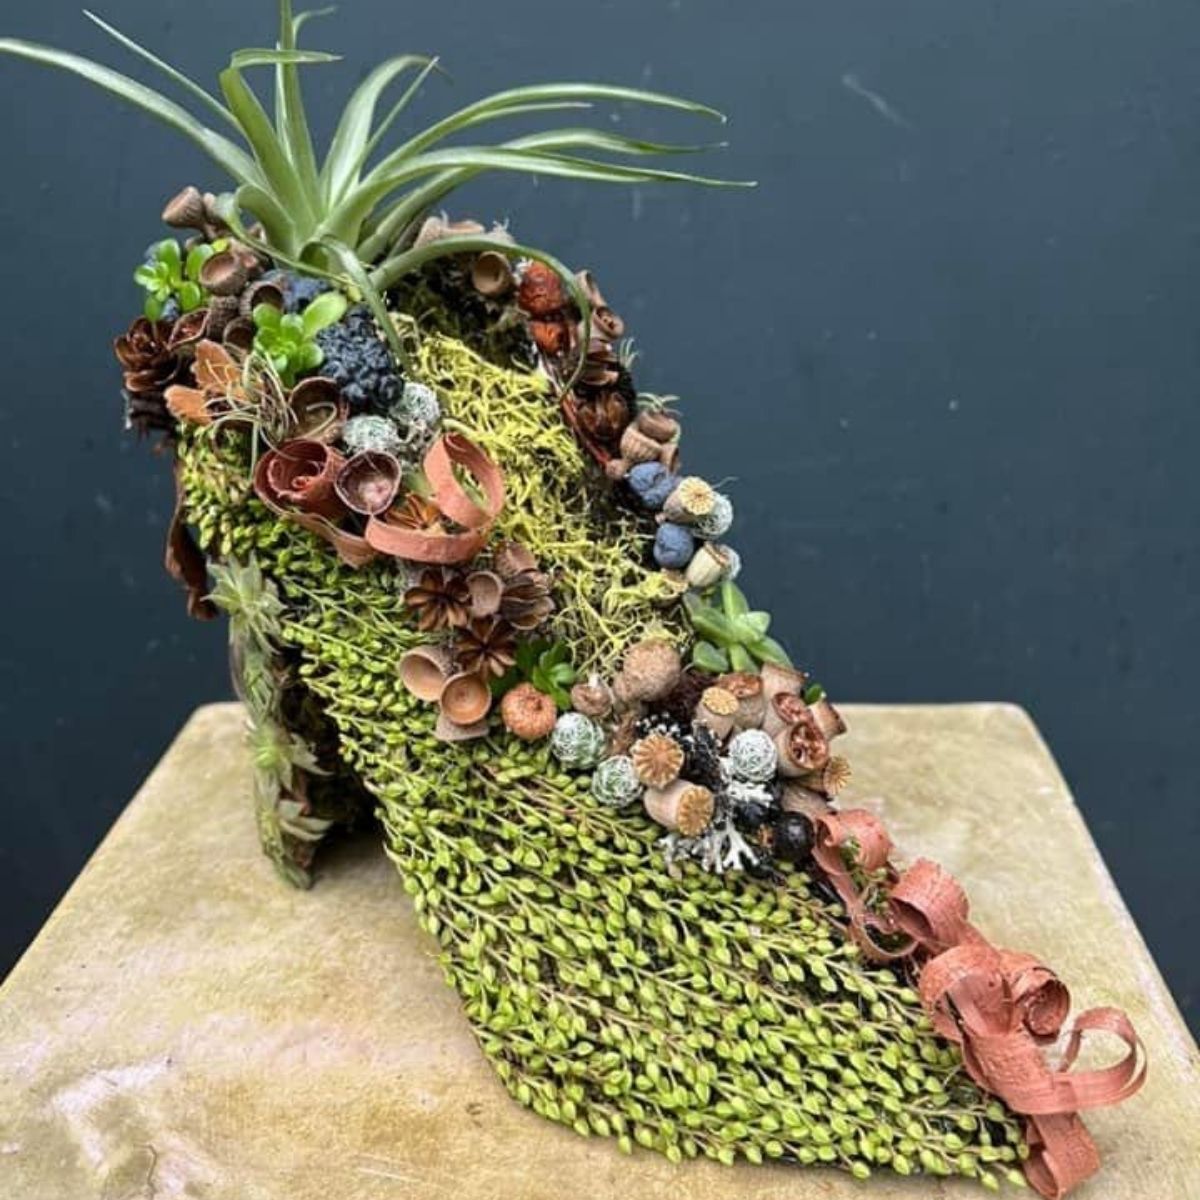 francoise-weeks-gives-botanical-woodland-shoes-as-a-present-for-one-of-her-friends-featured